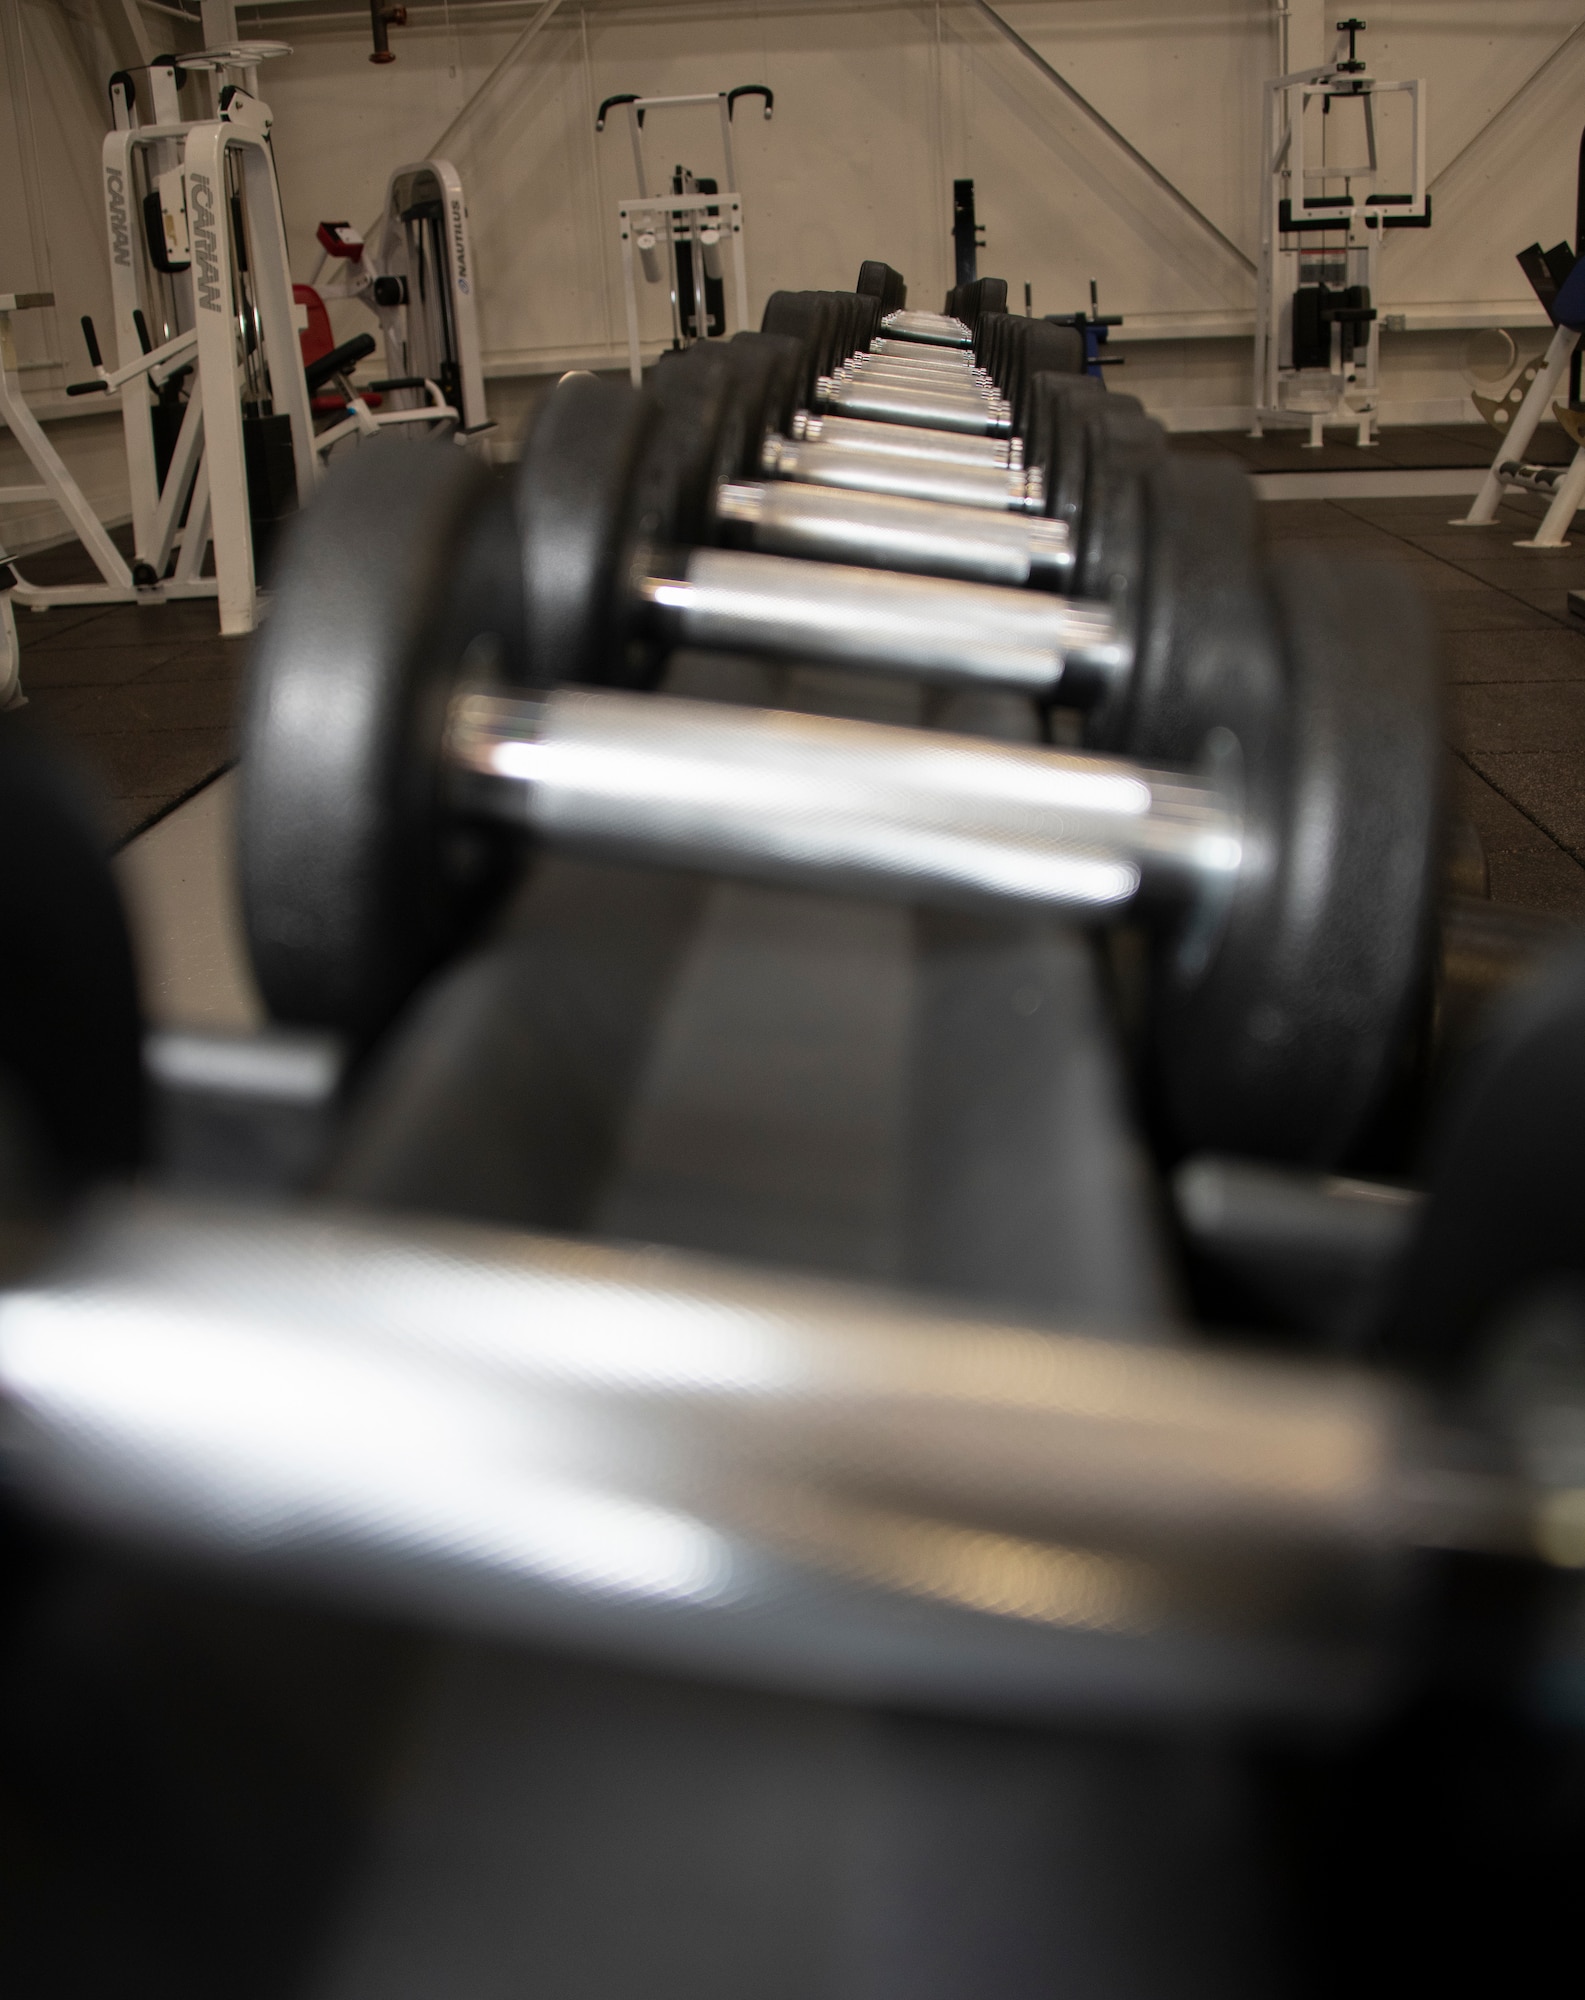 Dumbells sit on a rack in the Nose Dock Gym Oct. 11. 2019 at Travis Air Force Base, California. The new gym at Building 844 was facilitated through existing base funds, equipment donations and volunteer work by the 60th Mission Support Group. (U.S. Air Force photo by Heide Couch)